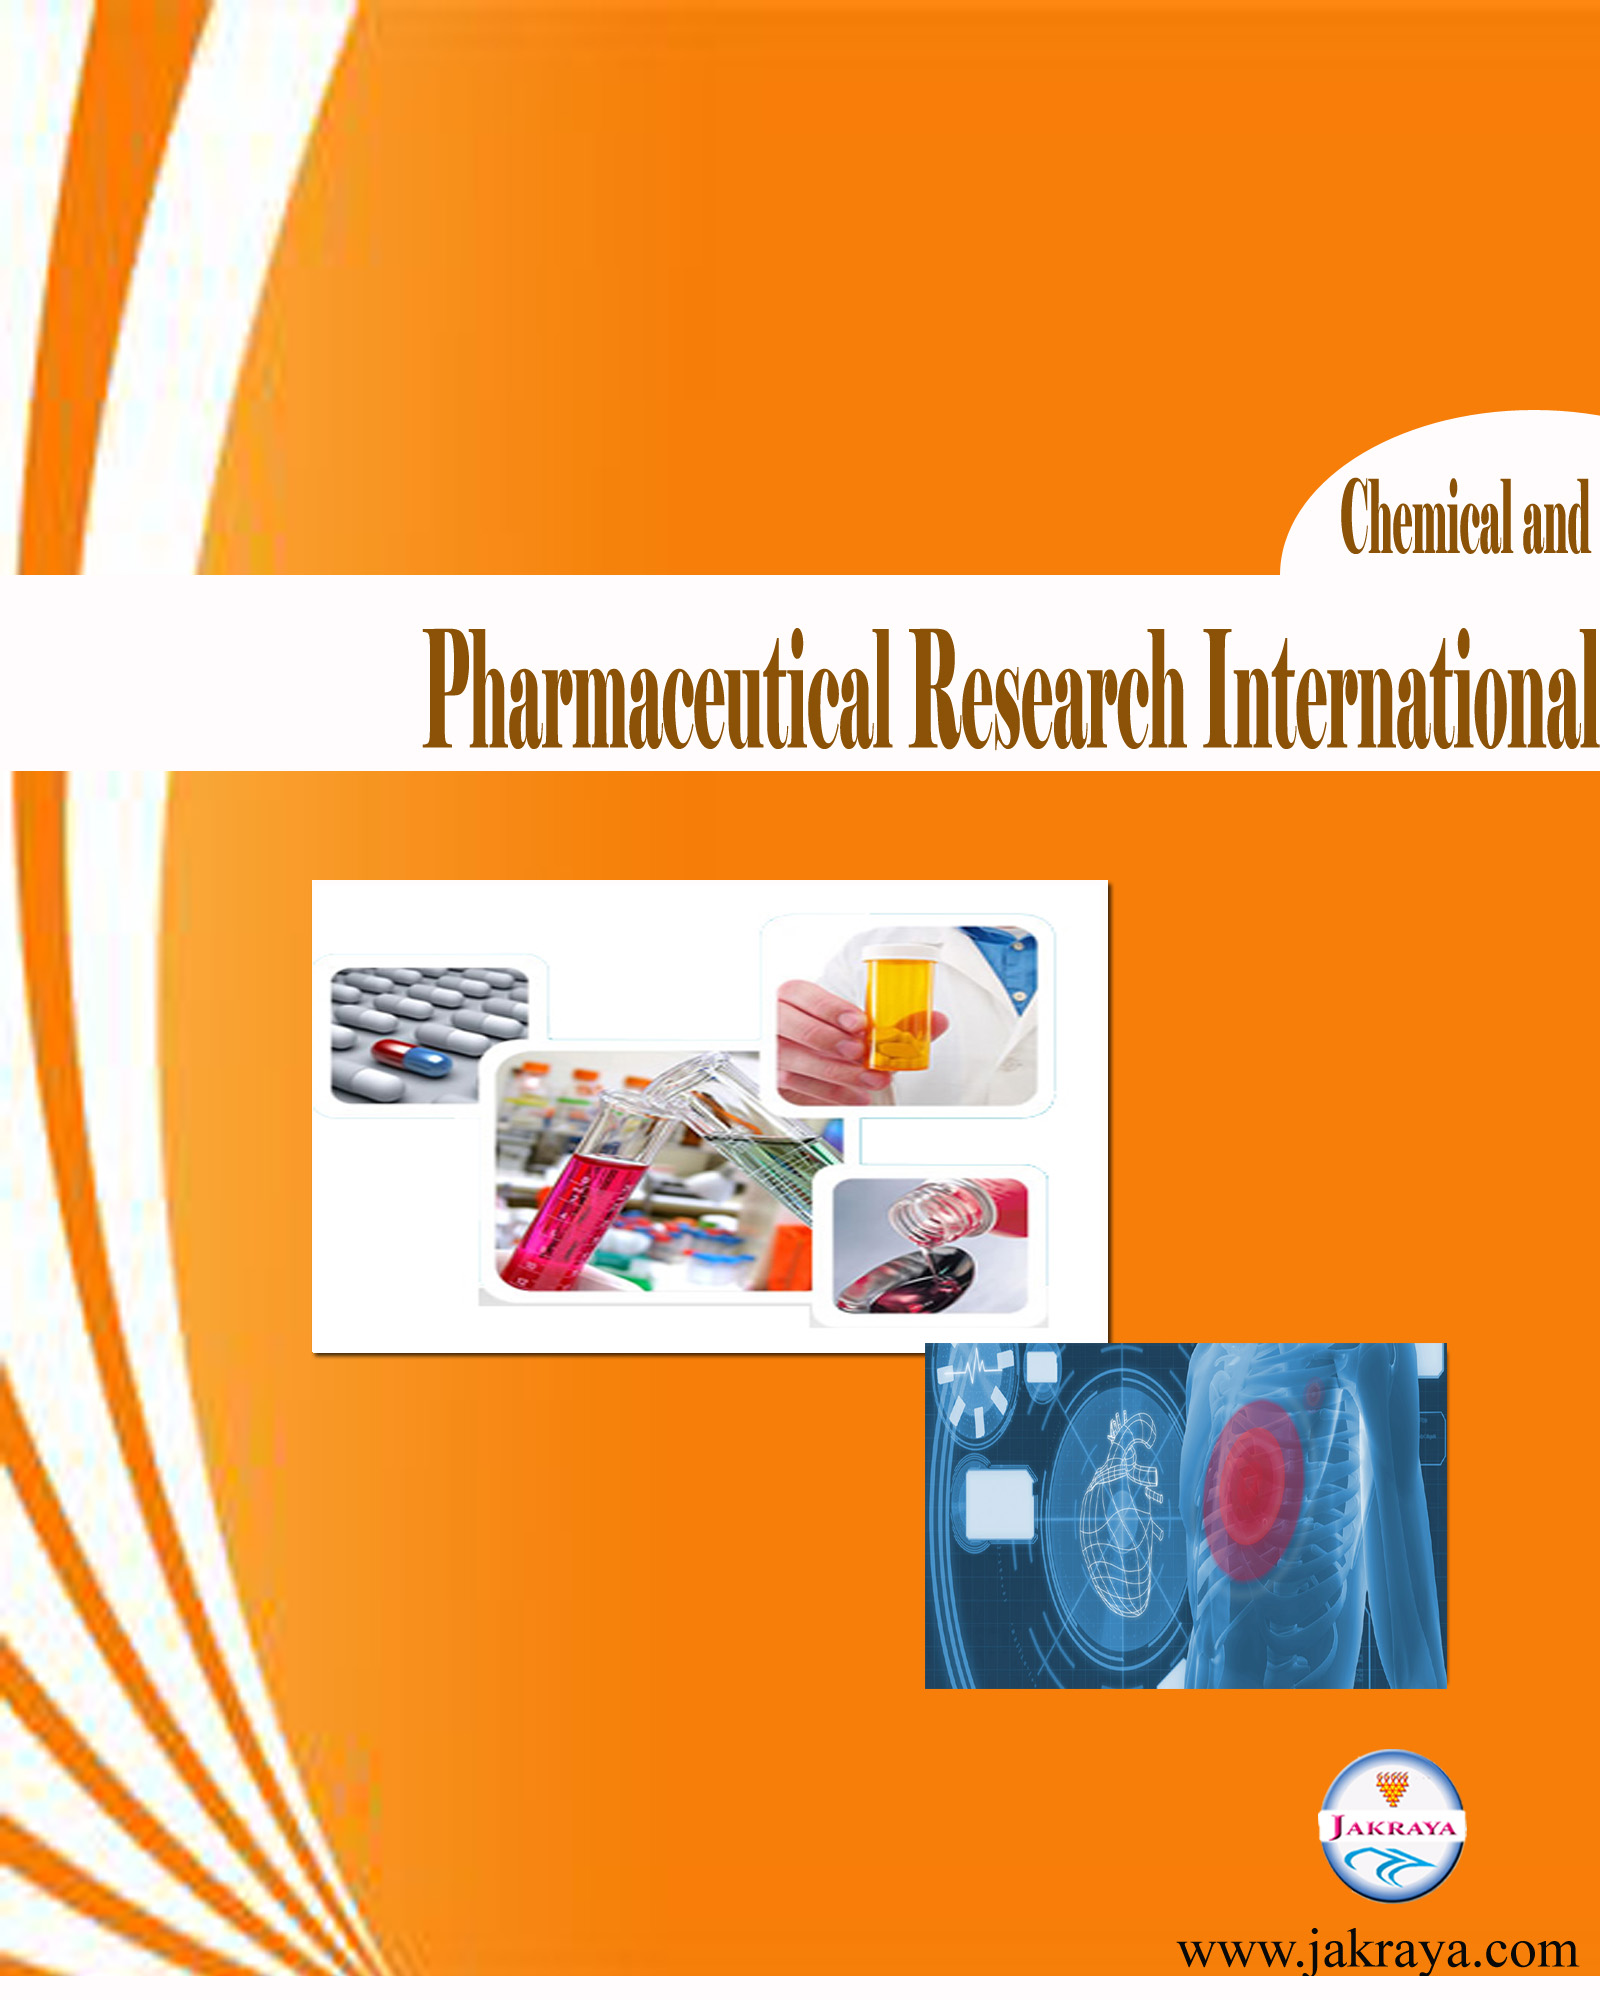  Chemical and Pharmaceutical Research International